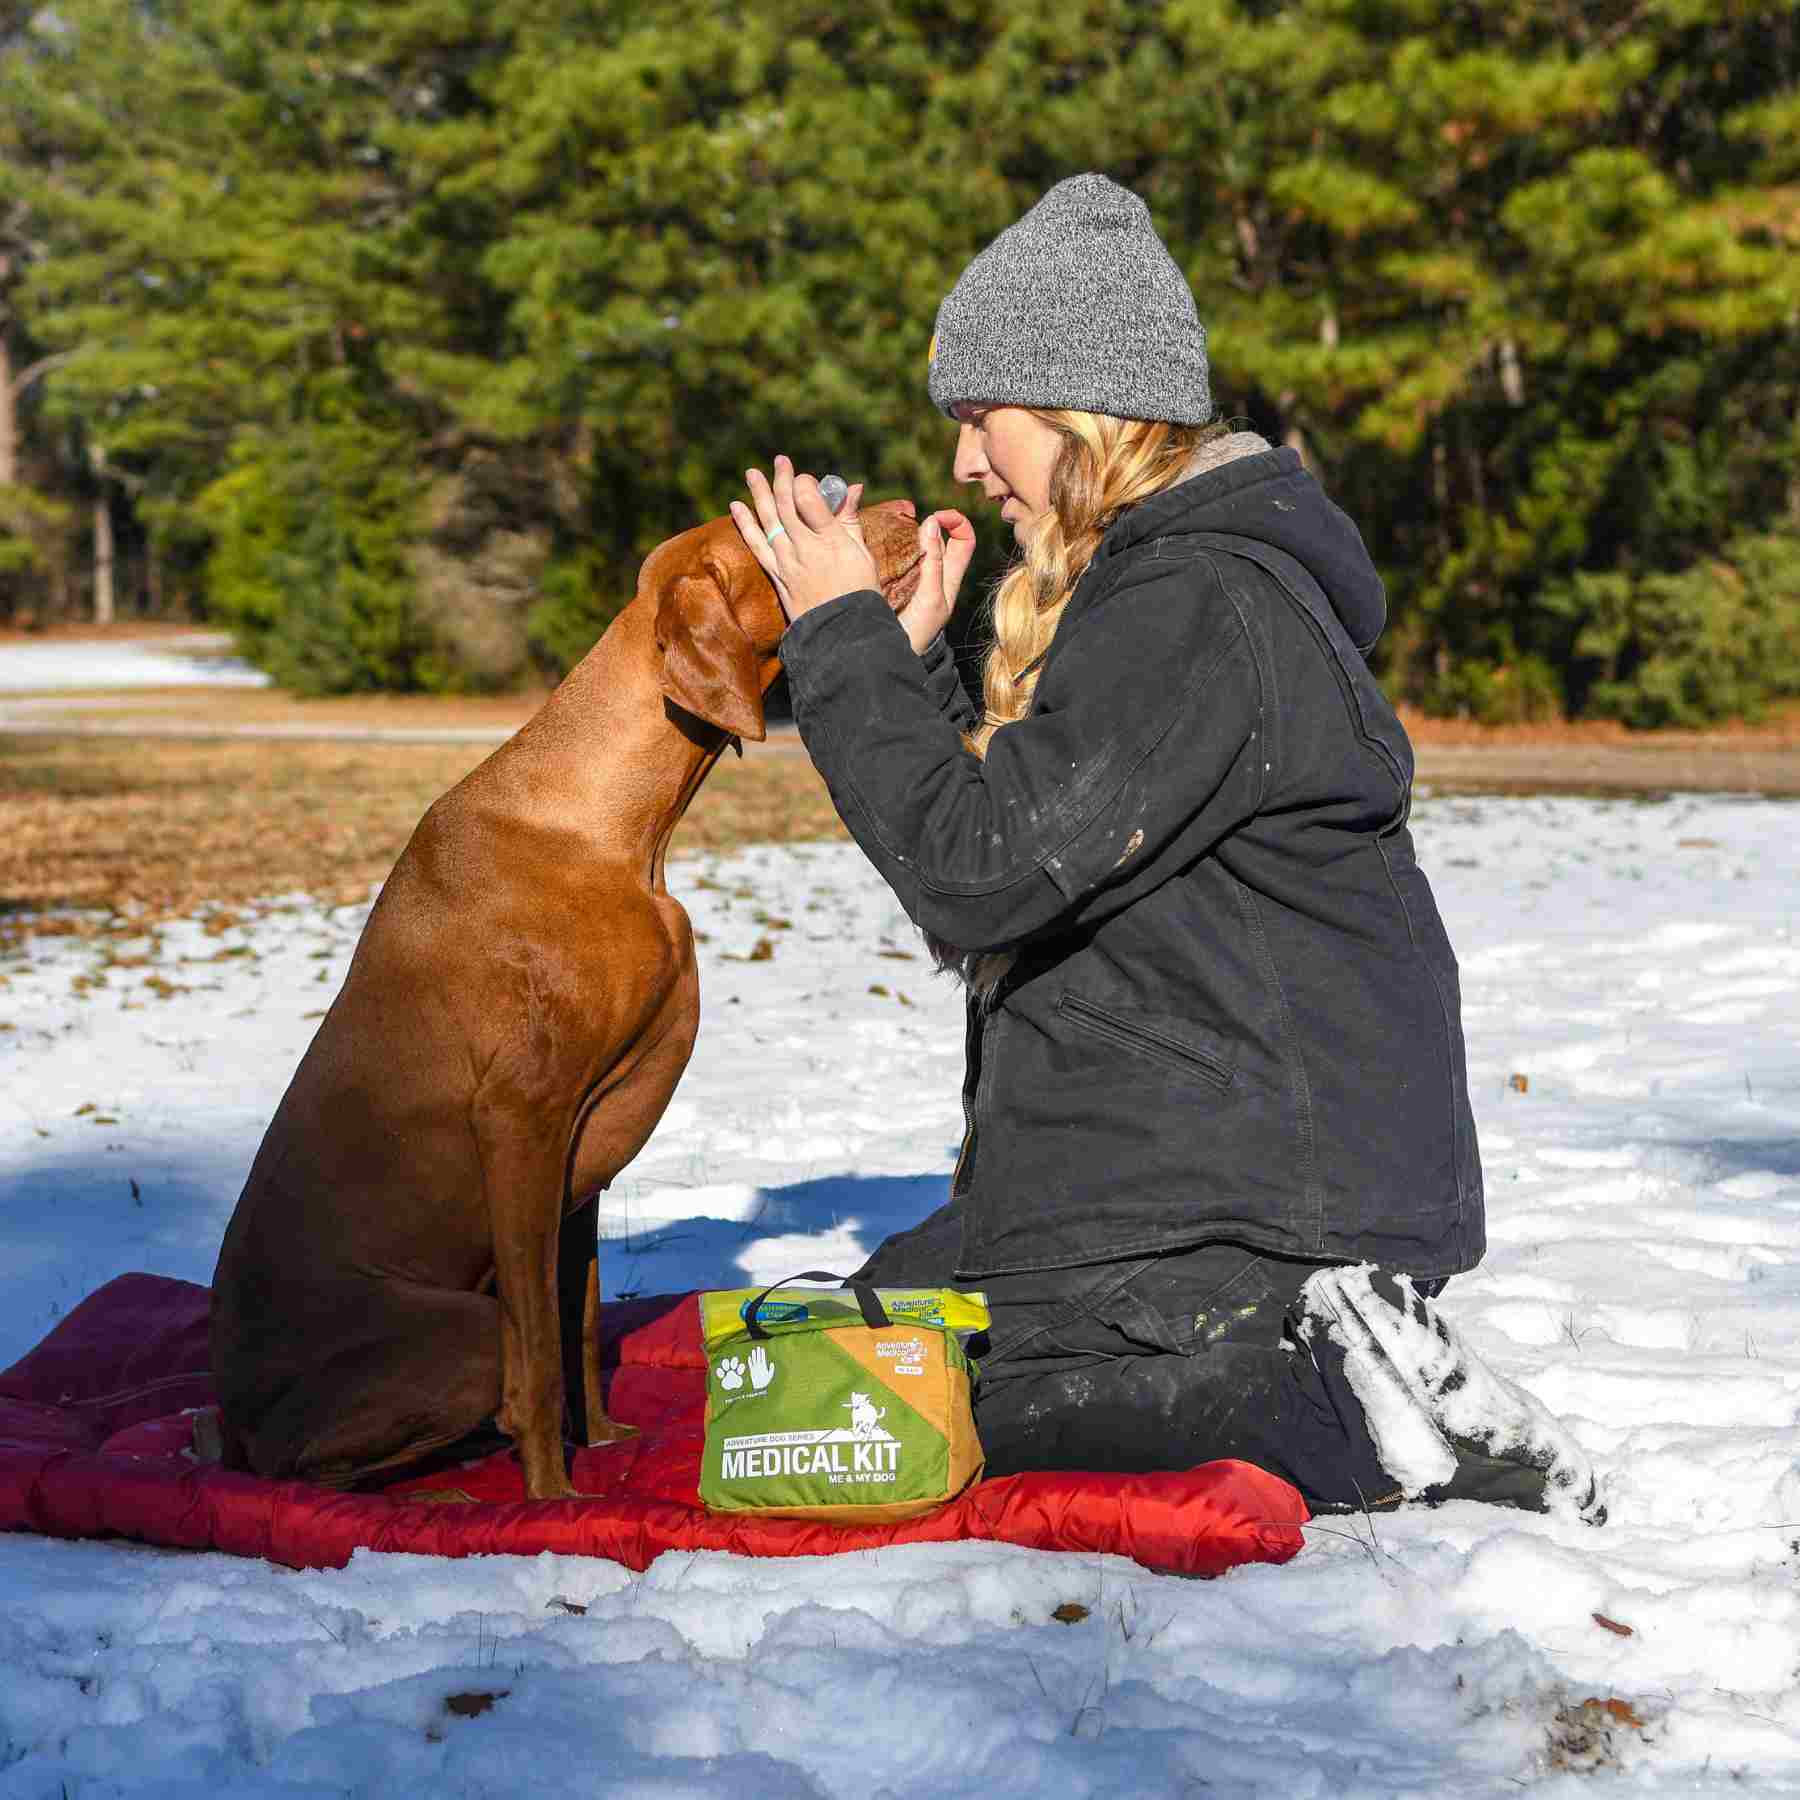 Adventure Dog Medical Kit - Me & My Dog placed on blanket in snow in front of woman and brown dog